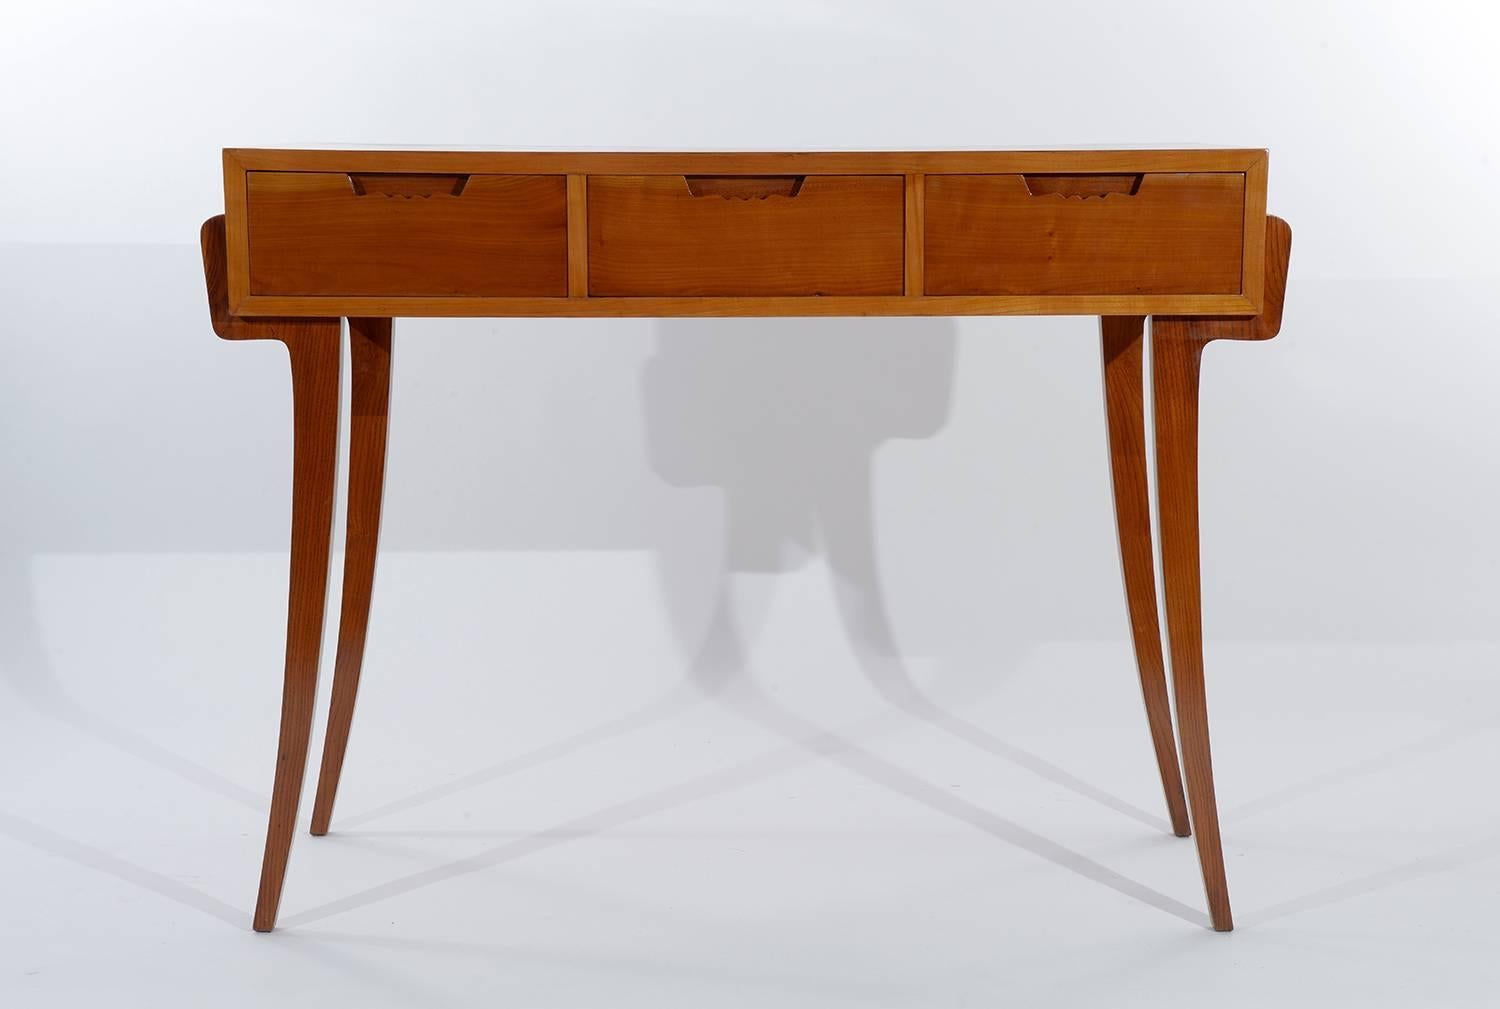 Four curved and slender legs and tree drawers with sculptured handles in the cherrywood.
This little console desk is finished on the back, can be put in the center of a room or against the wall.